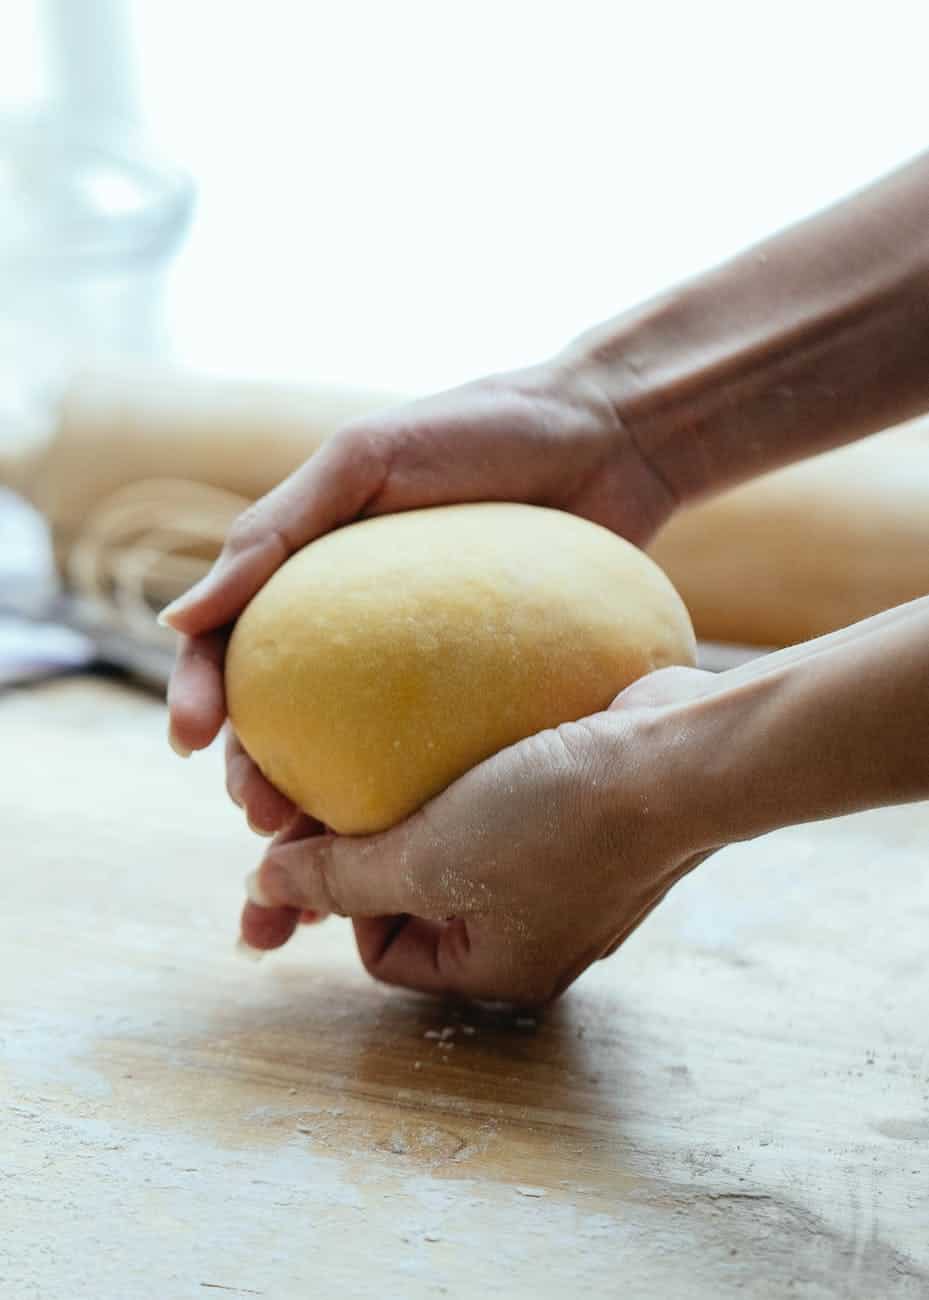 crop cook with raw dough
Photo by Katerina Holmes on Pexels.com